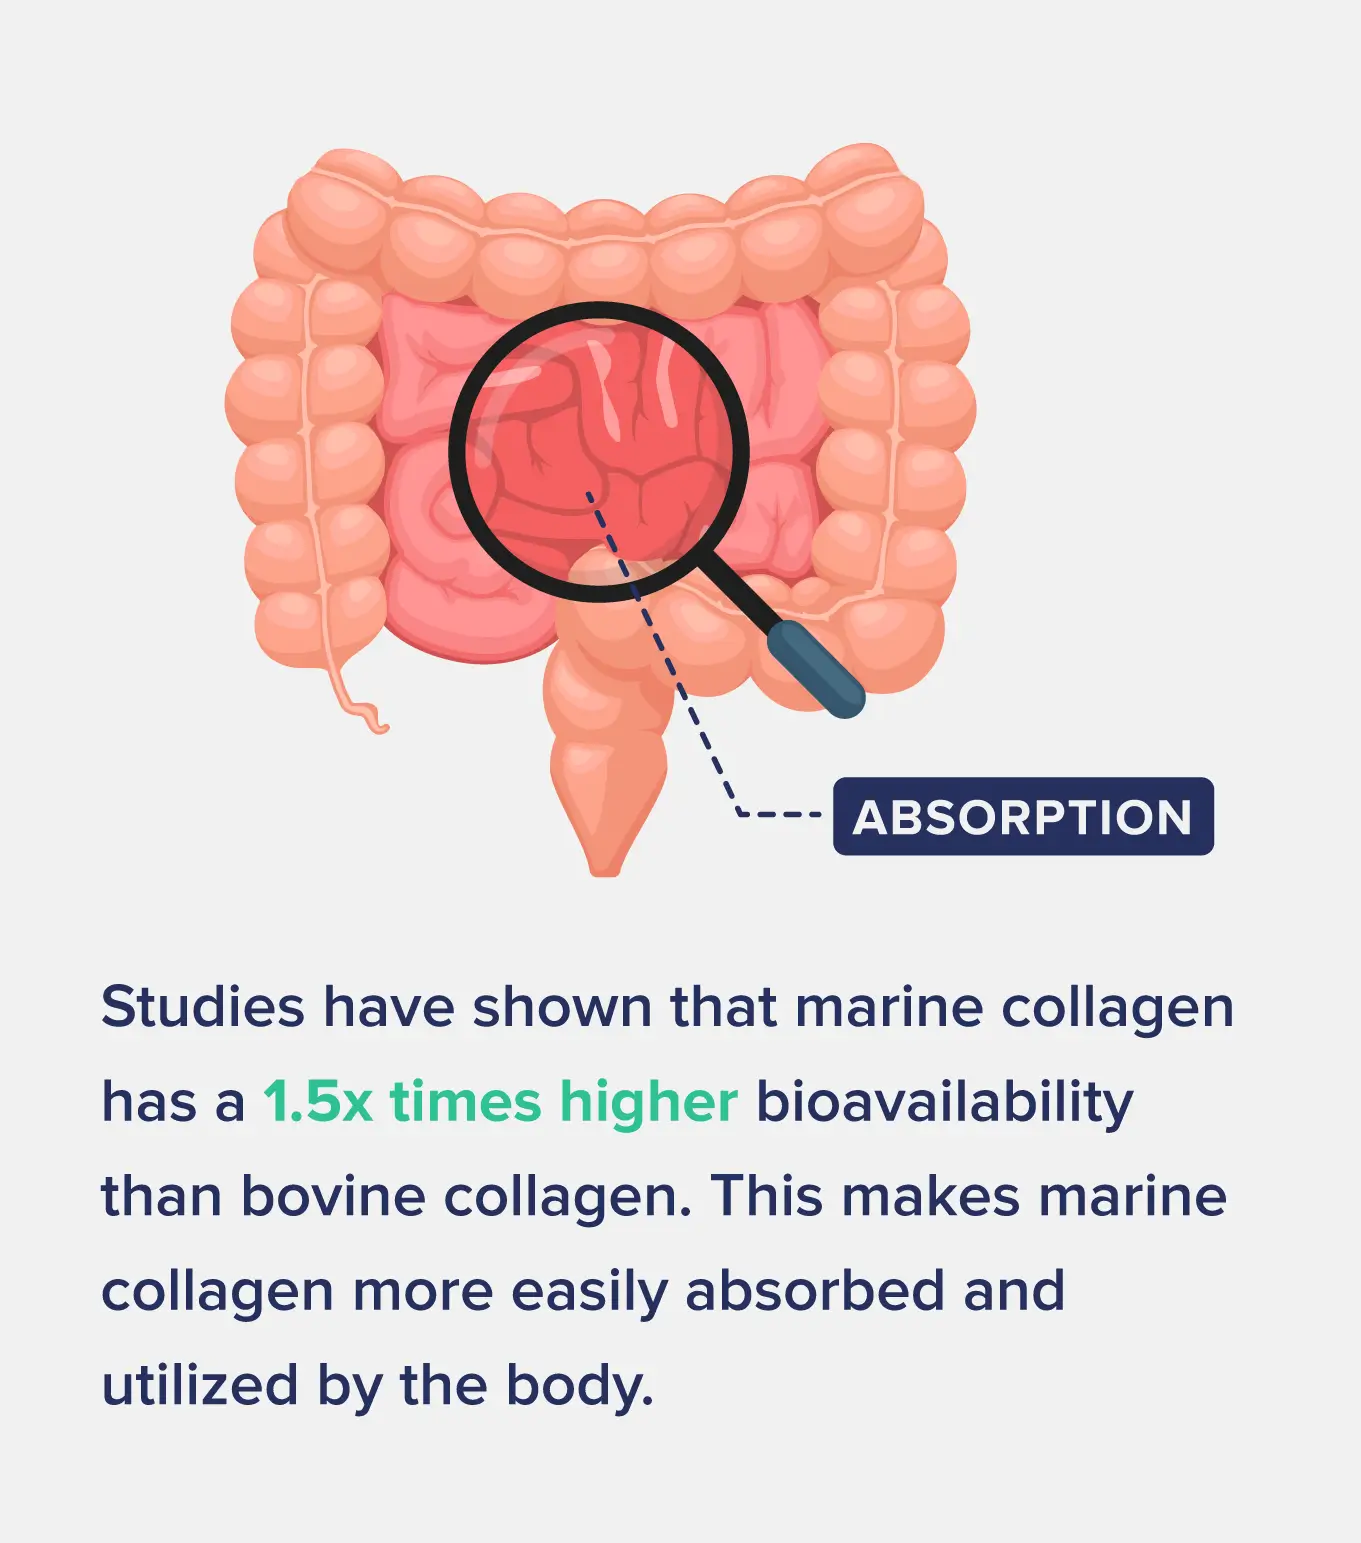 Studies have shown that marine collagen has a 1.5x times higher bioavailability than bovine collagen. This makes marine collagen more easily absorbed and utilized by the body.